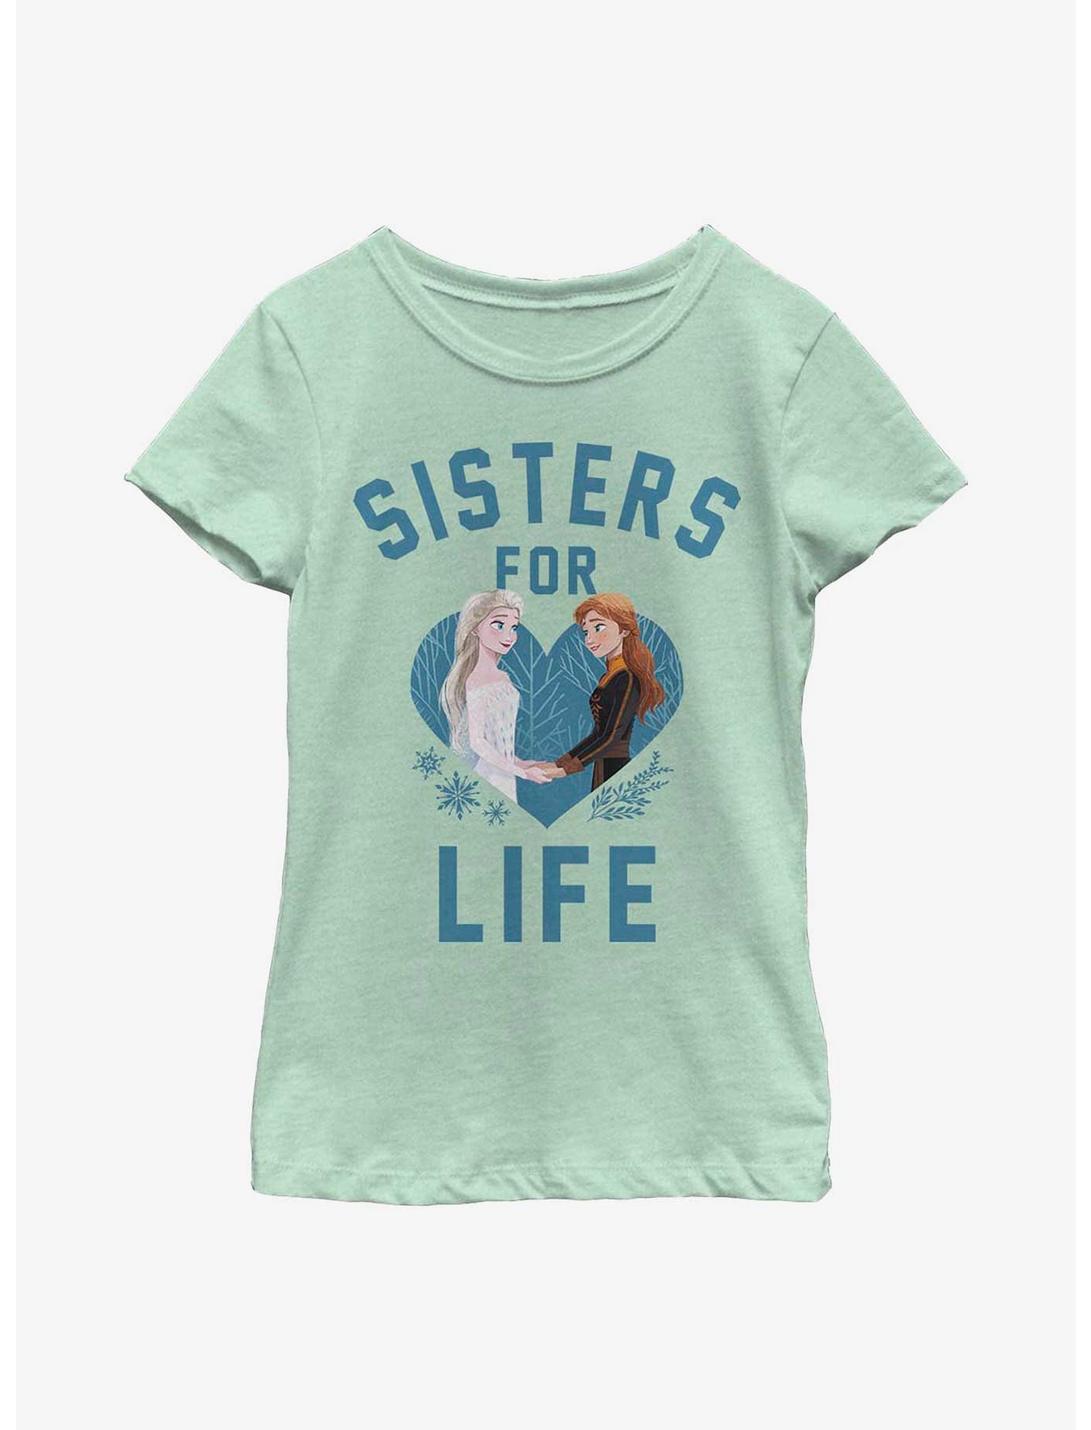 Disney Frozen 2 Sisters For Life Youth Girls T-Shirt, MINT, hi-res